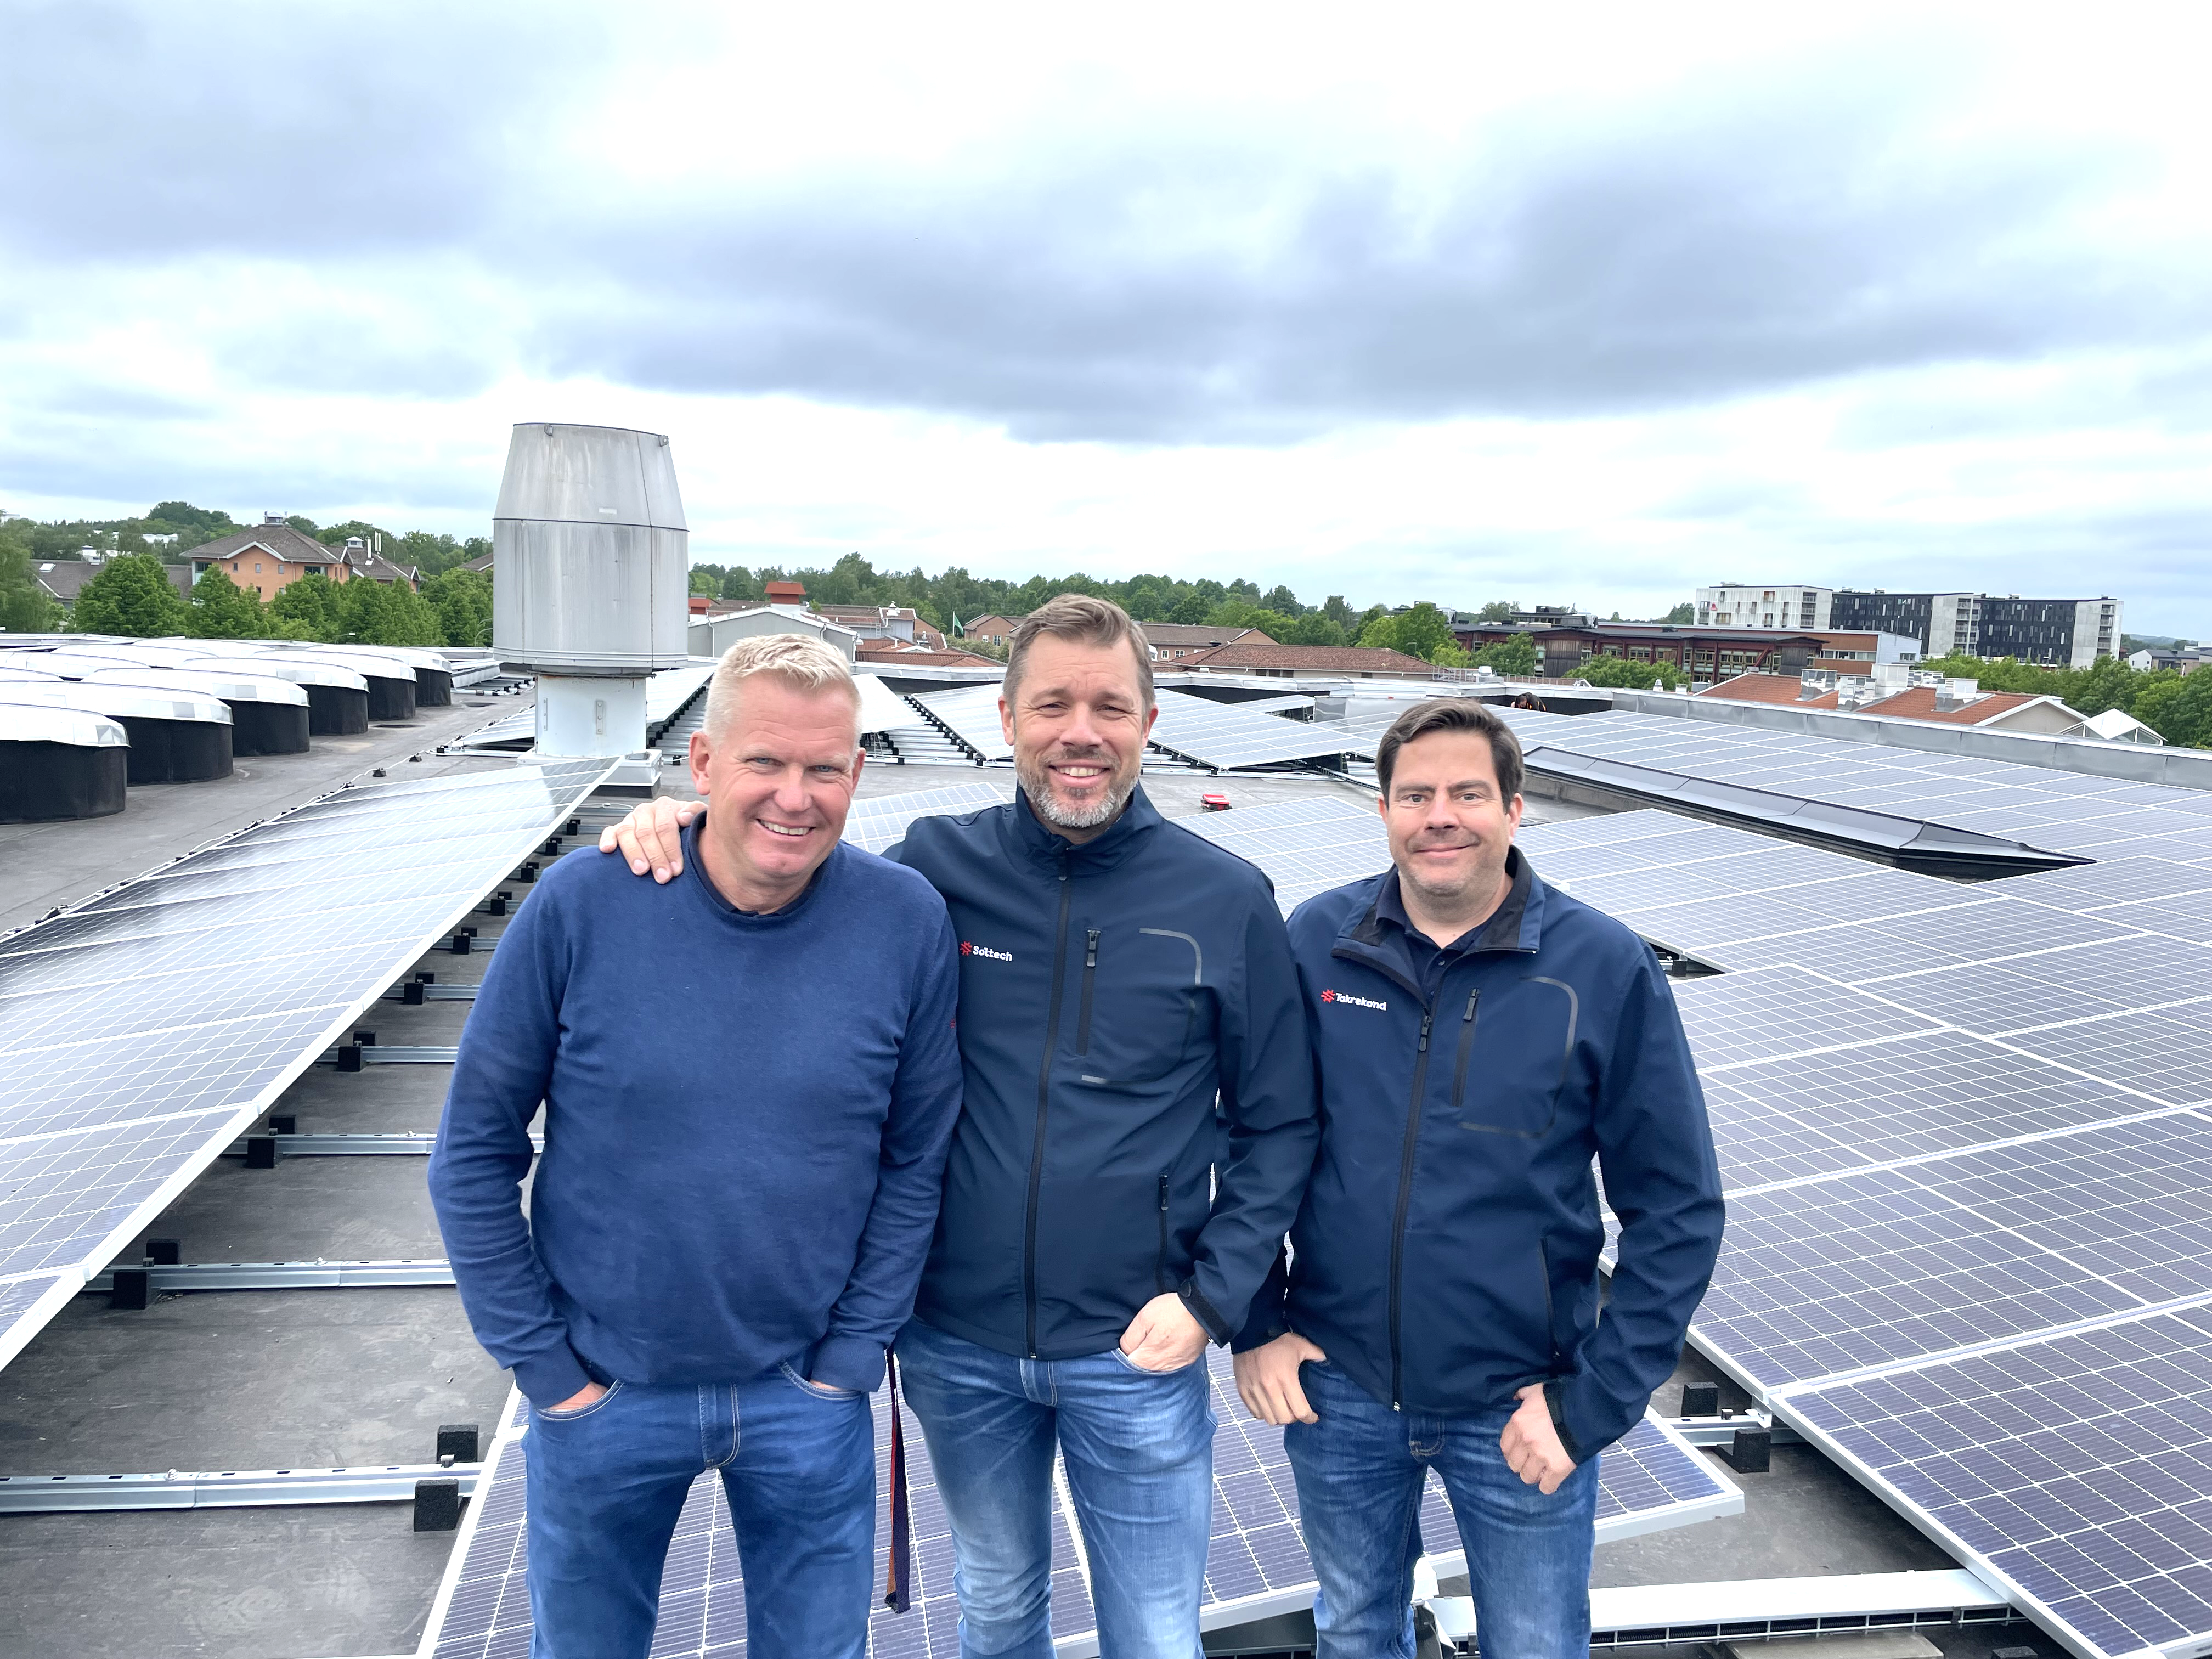 The Soltech companies Takrekond and NP Gruppen supplies the campus area in Växjö with solar energy solutions - order value amounts to approx. SEK 4 million